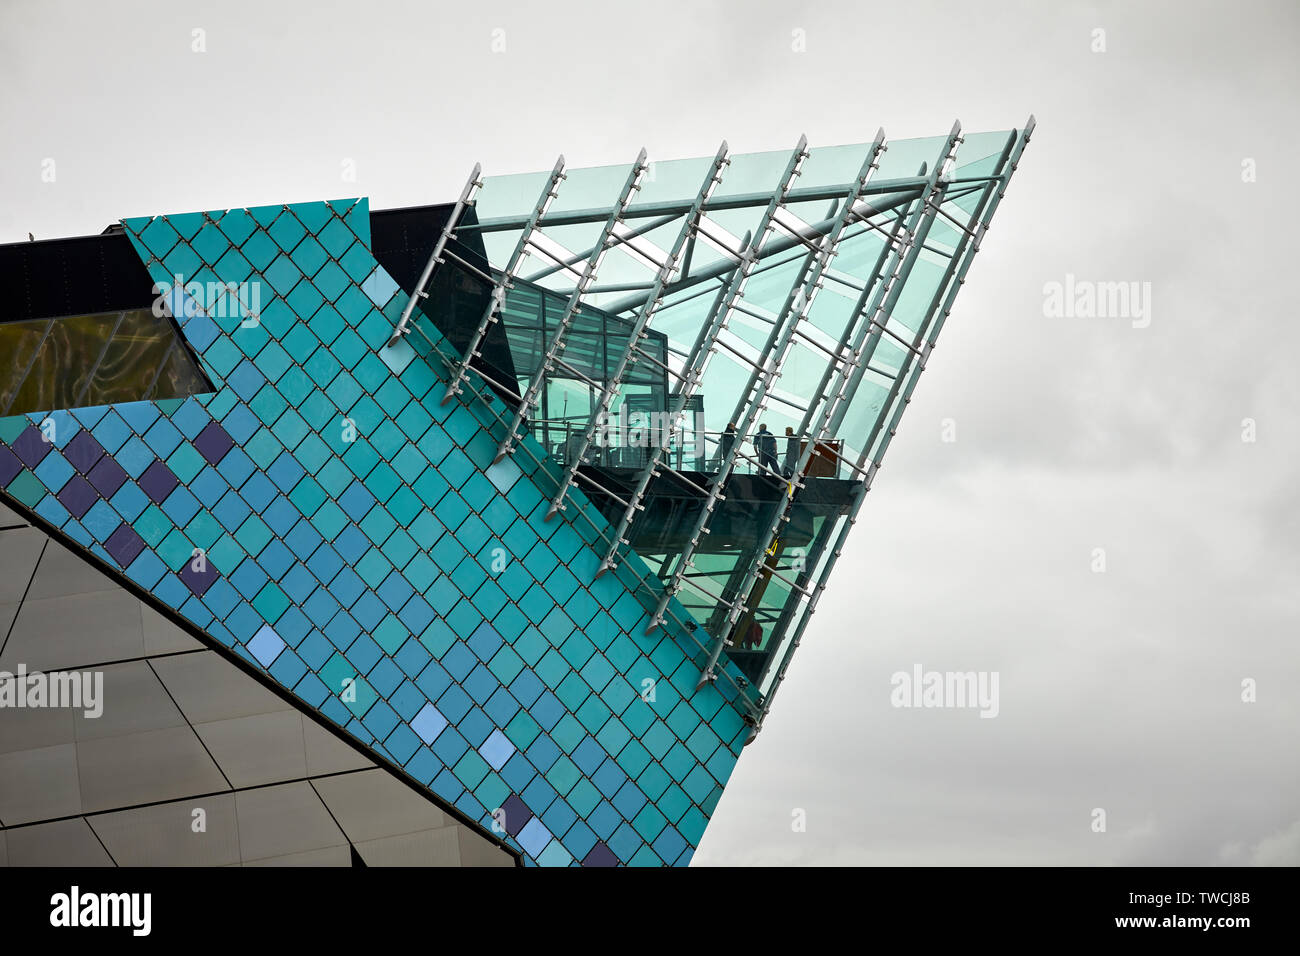 Kingston upon Hull port city East Yorkshire Depp, a Huge aquarium situated at Sammy's Point, Humber Estuary building designed by Sir Terry Farrell Stock Photo